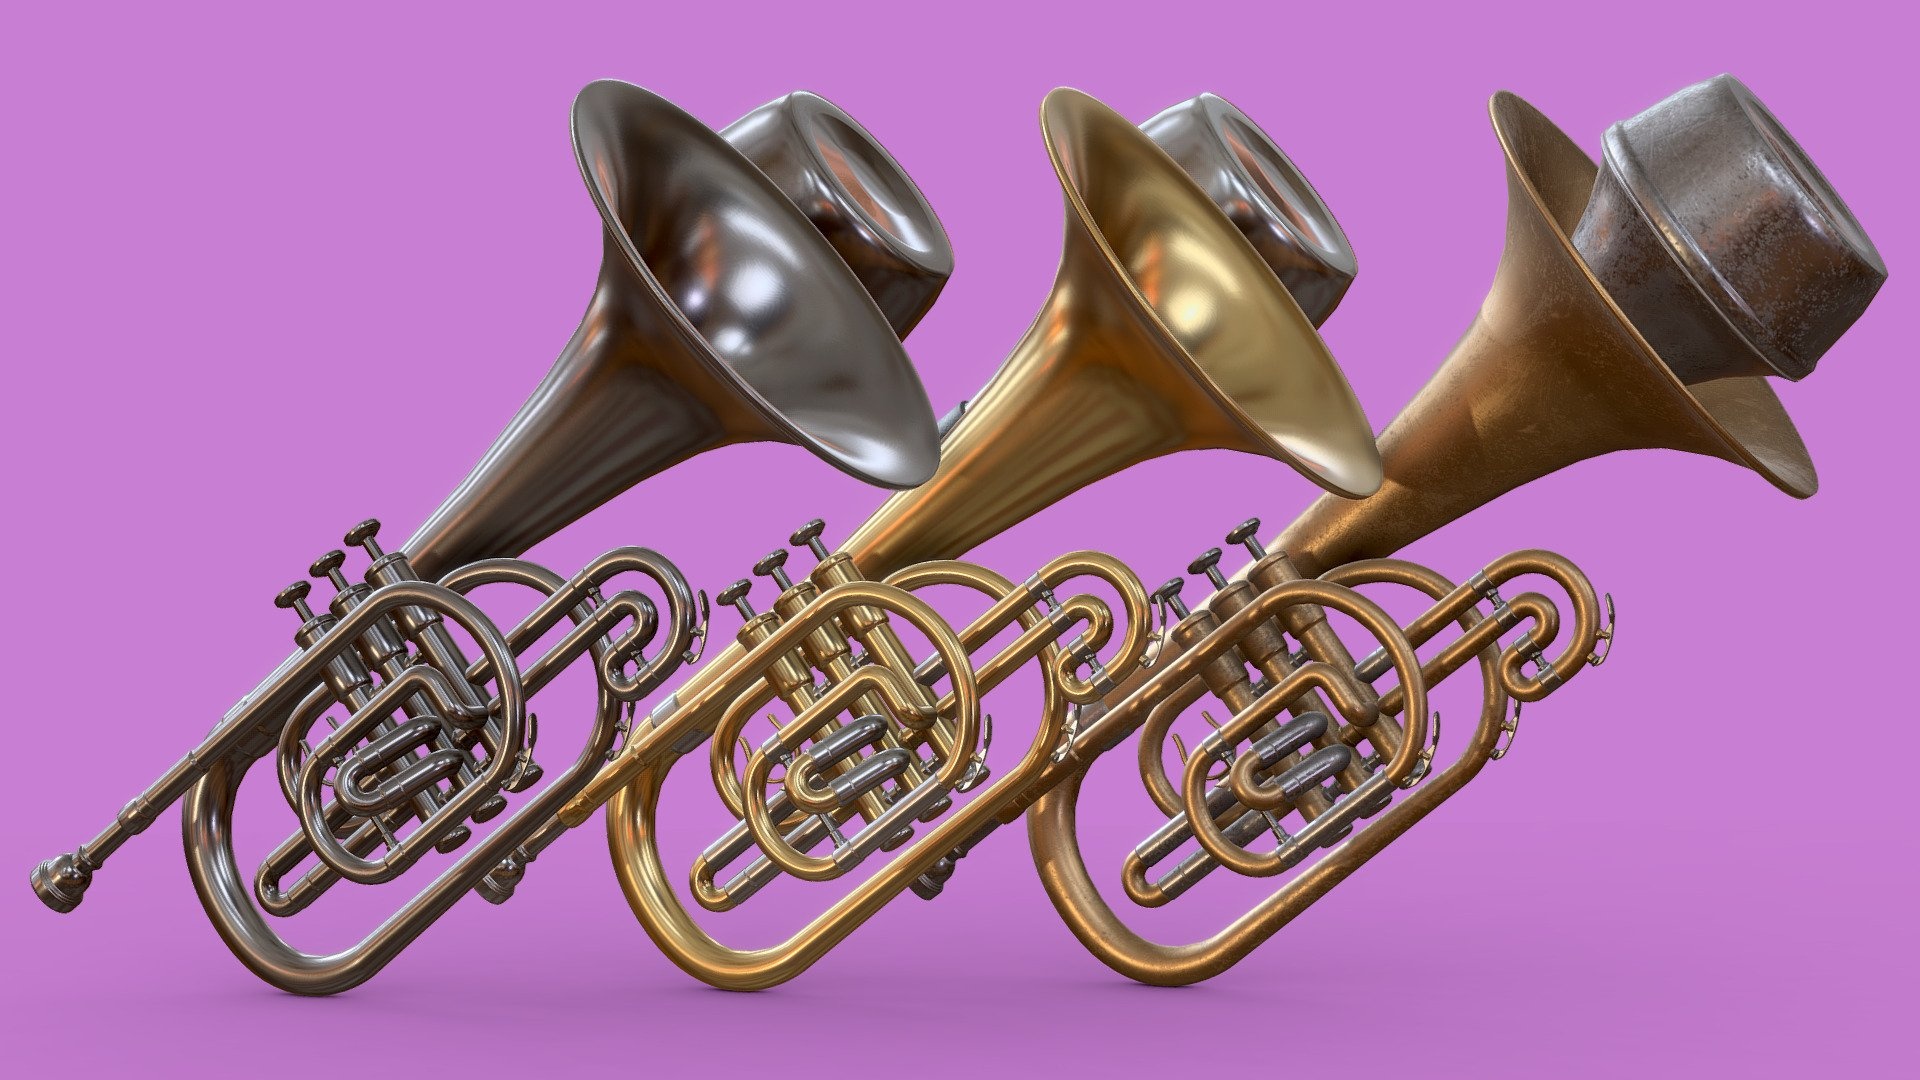 Mellophone: Pocket Trumpet, Reduced Bell And Bore Size Design, Labrophone, Jazz Mute, 3D Model. 1920x1080 Full HD Background.